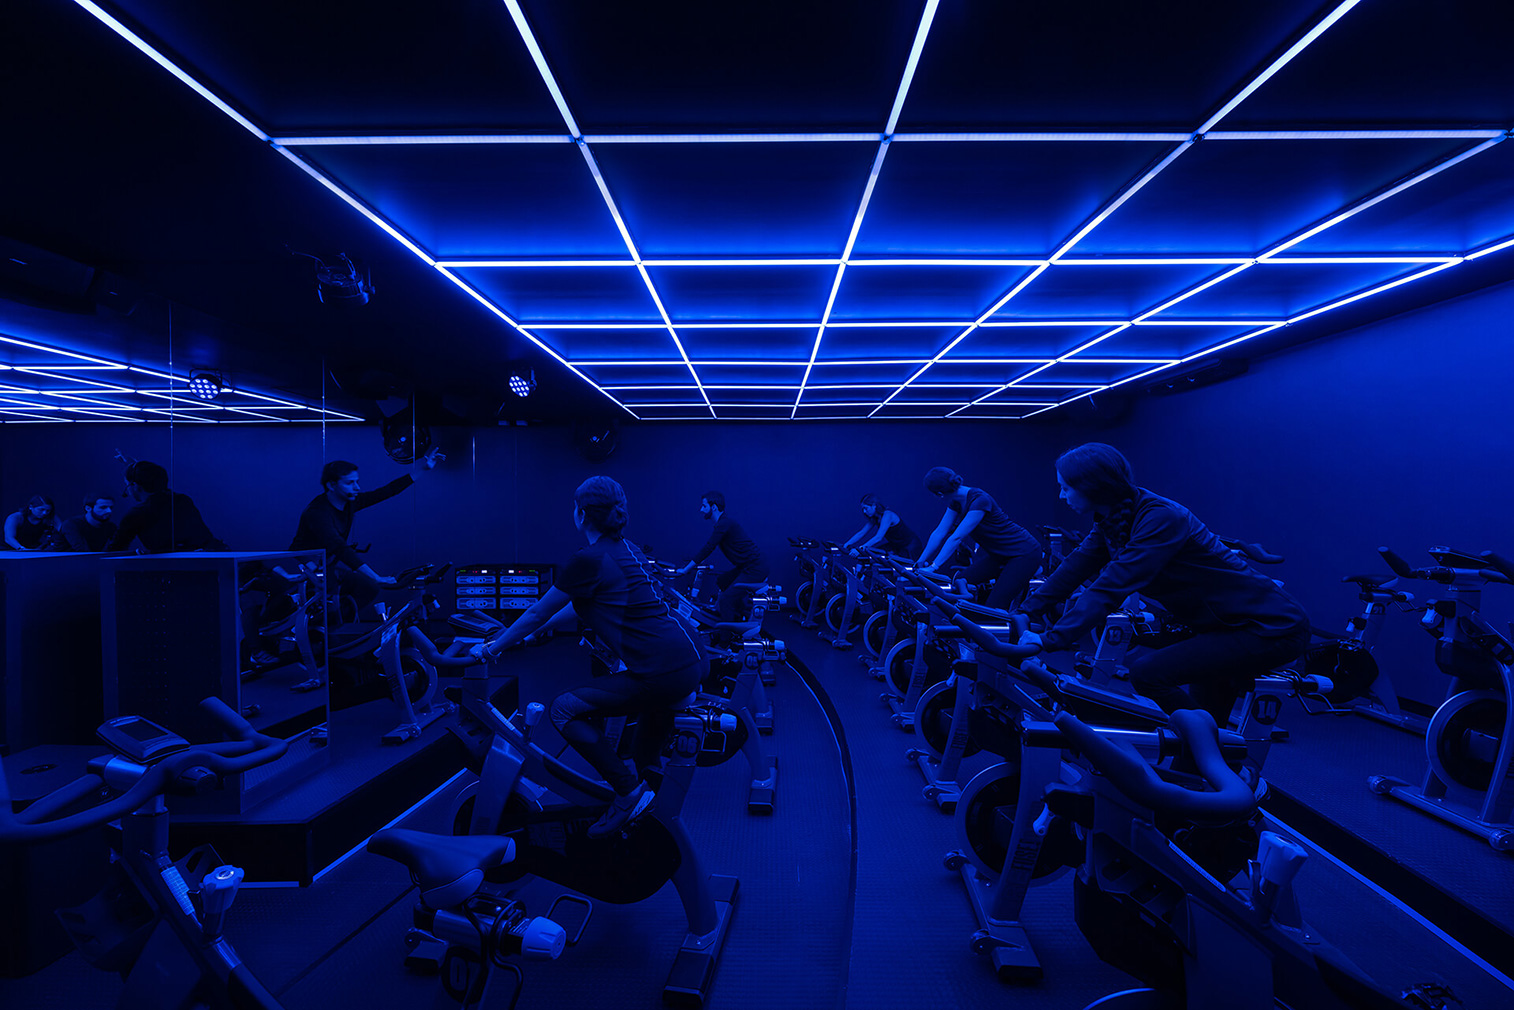 Gyms that raise the bar for design: Refuse spinning club